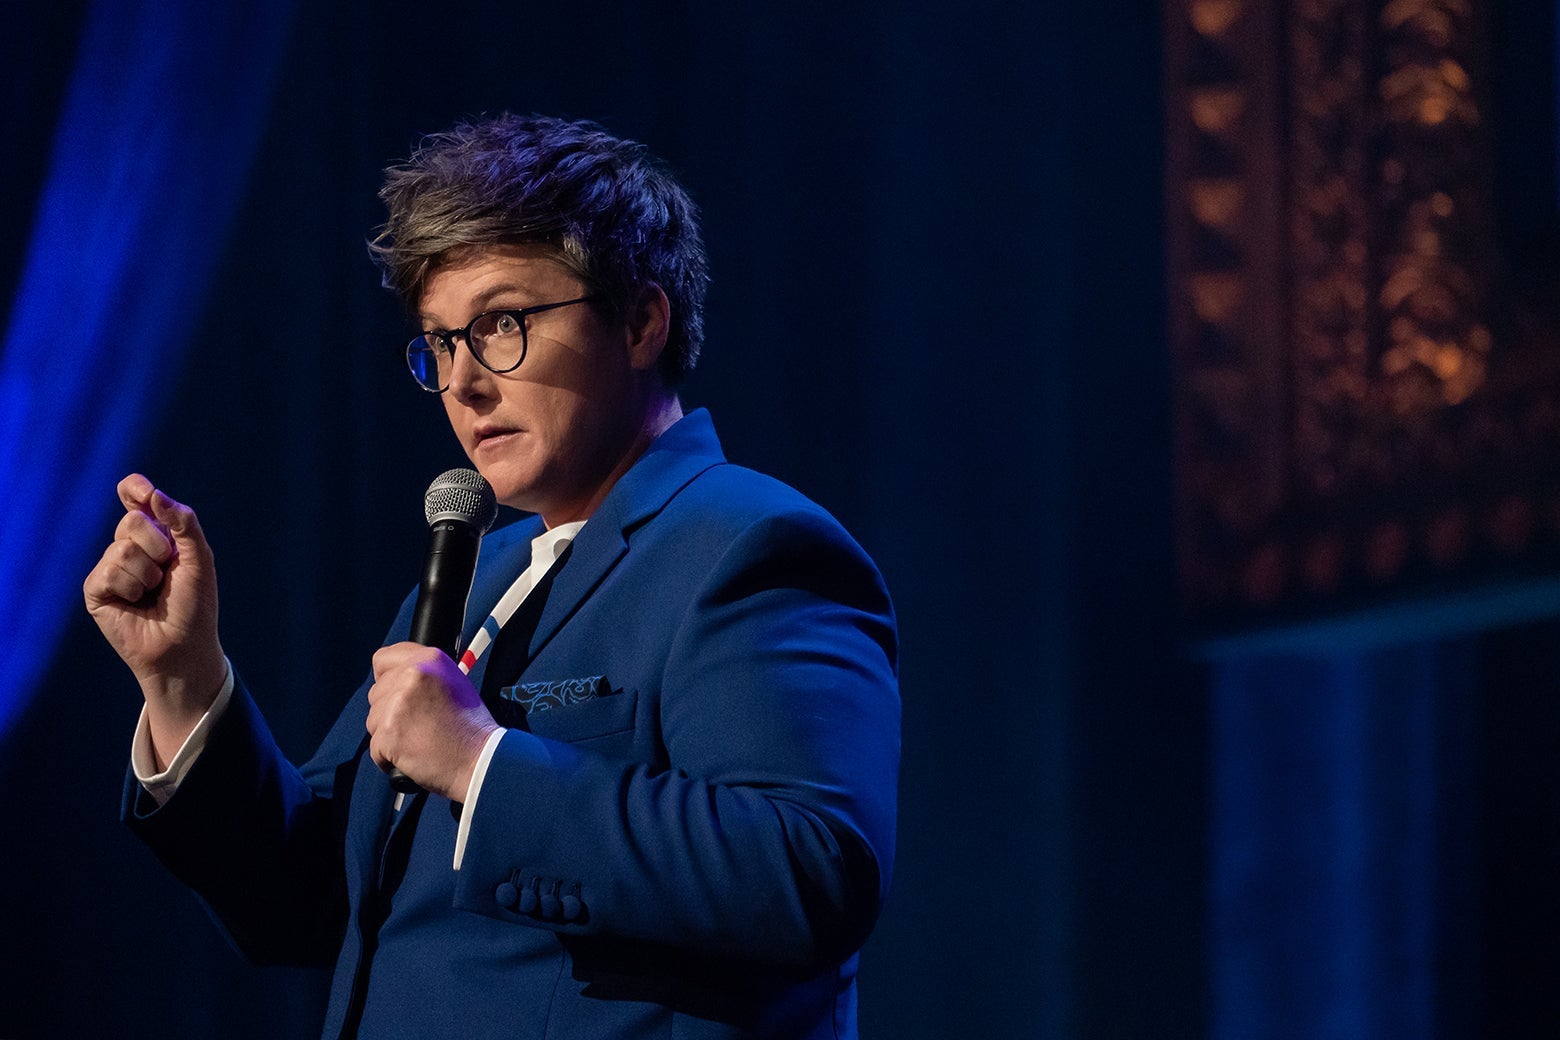 Hannah Gadsby onstage wearing a blue jacket and striped shirt, holding a mic.